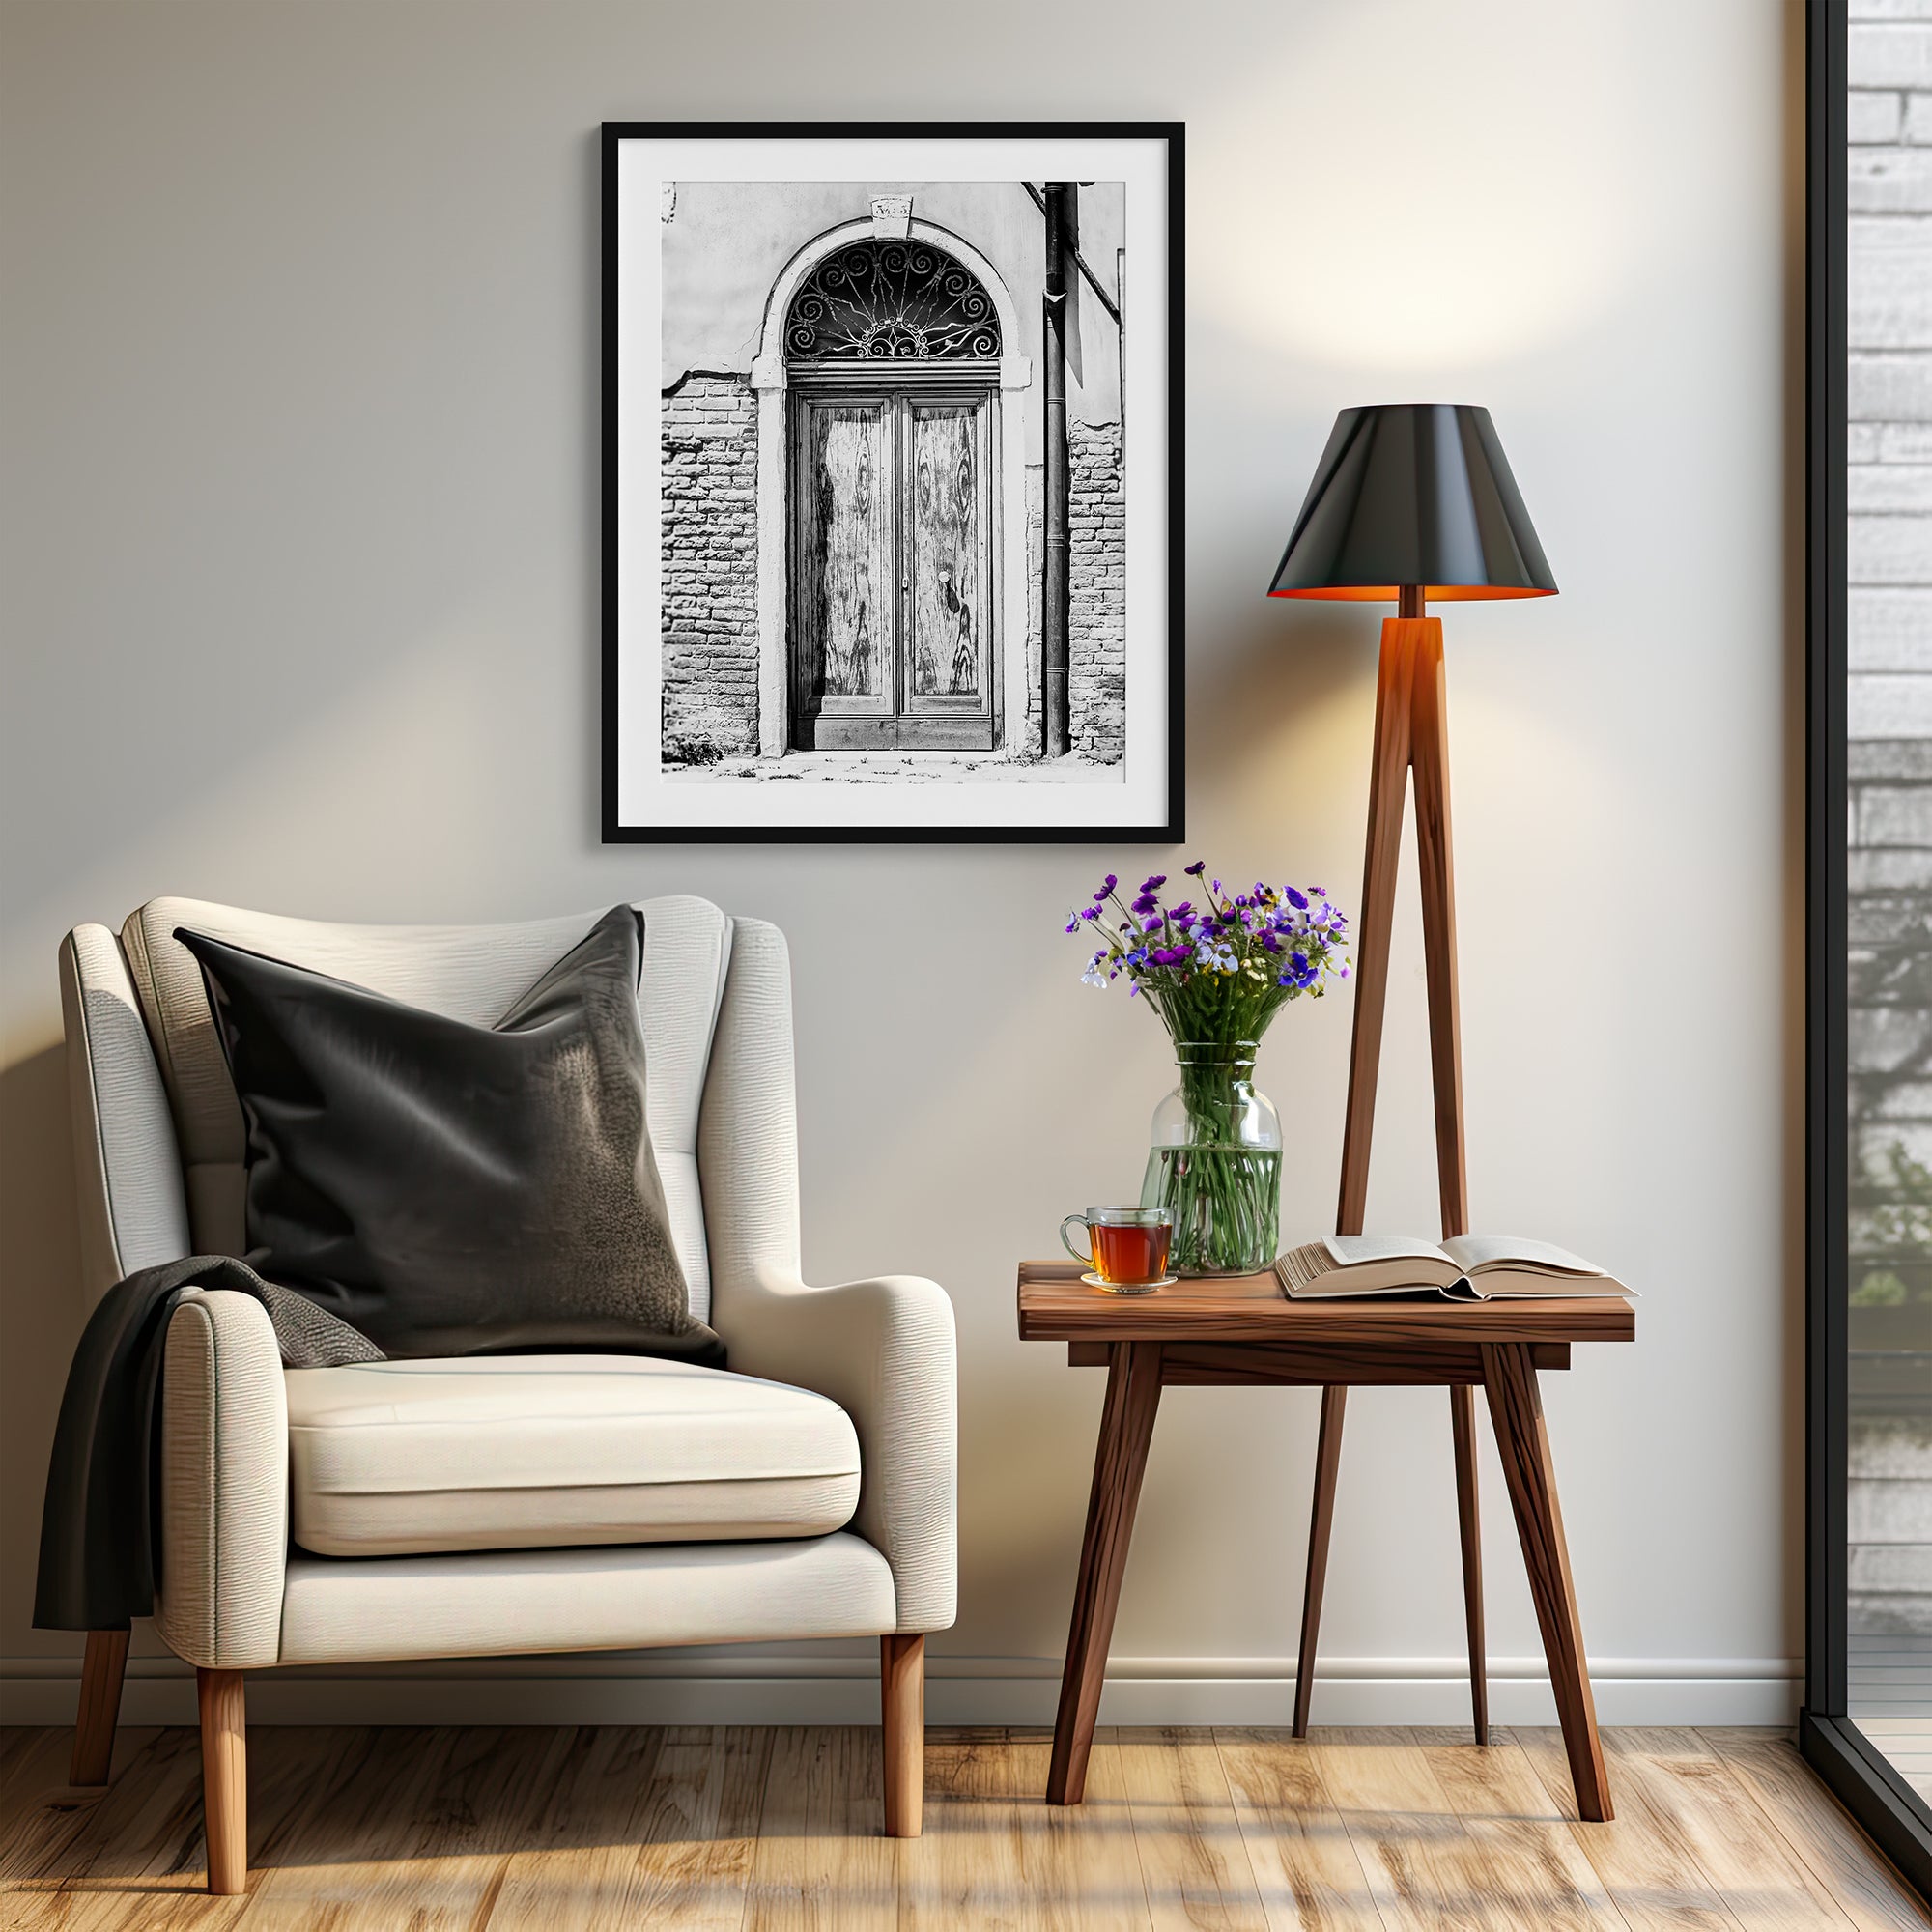 Black and White | Wrap Art Photography or Venice Fine Canvas Door Italy Print Russo Lisa Vintage